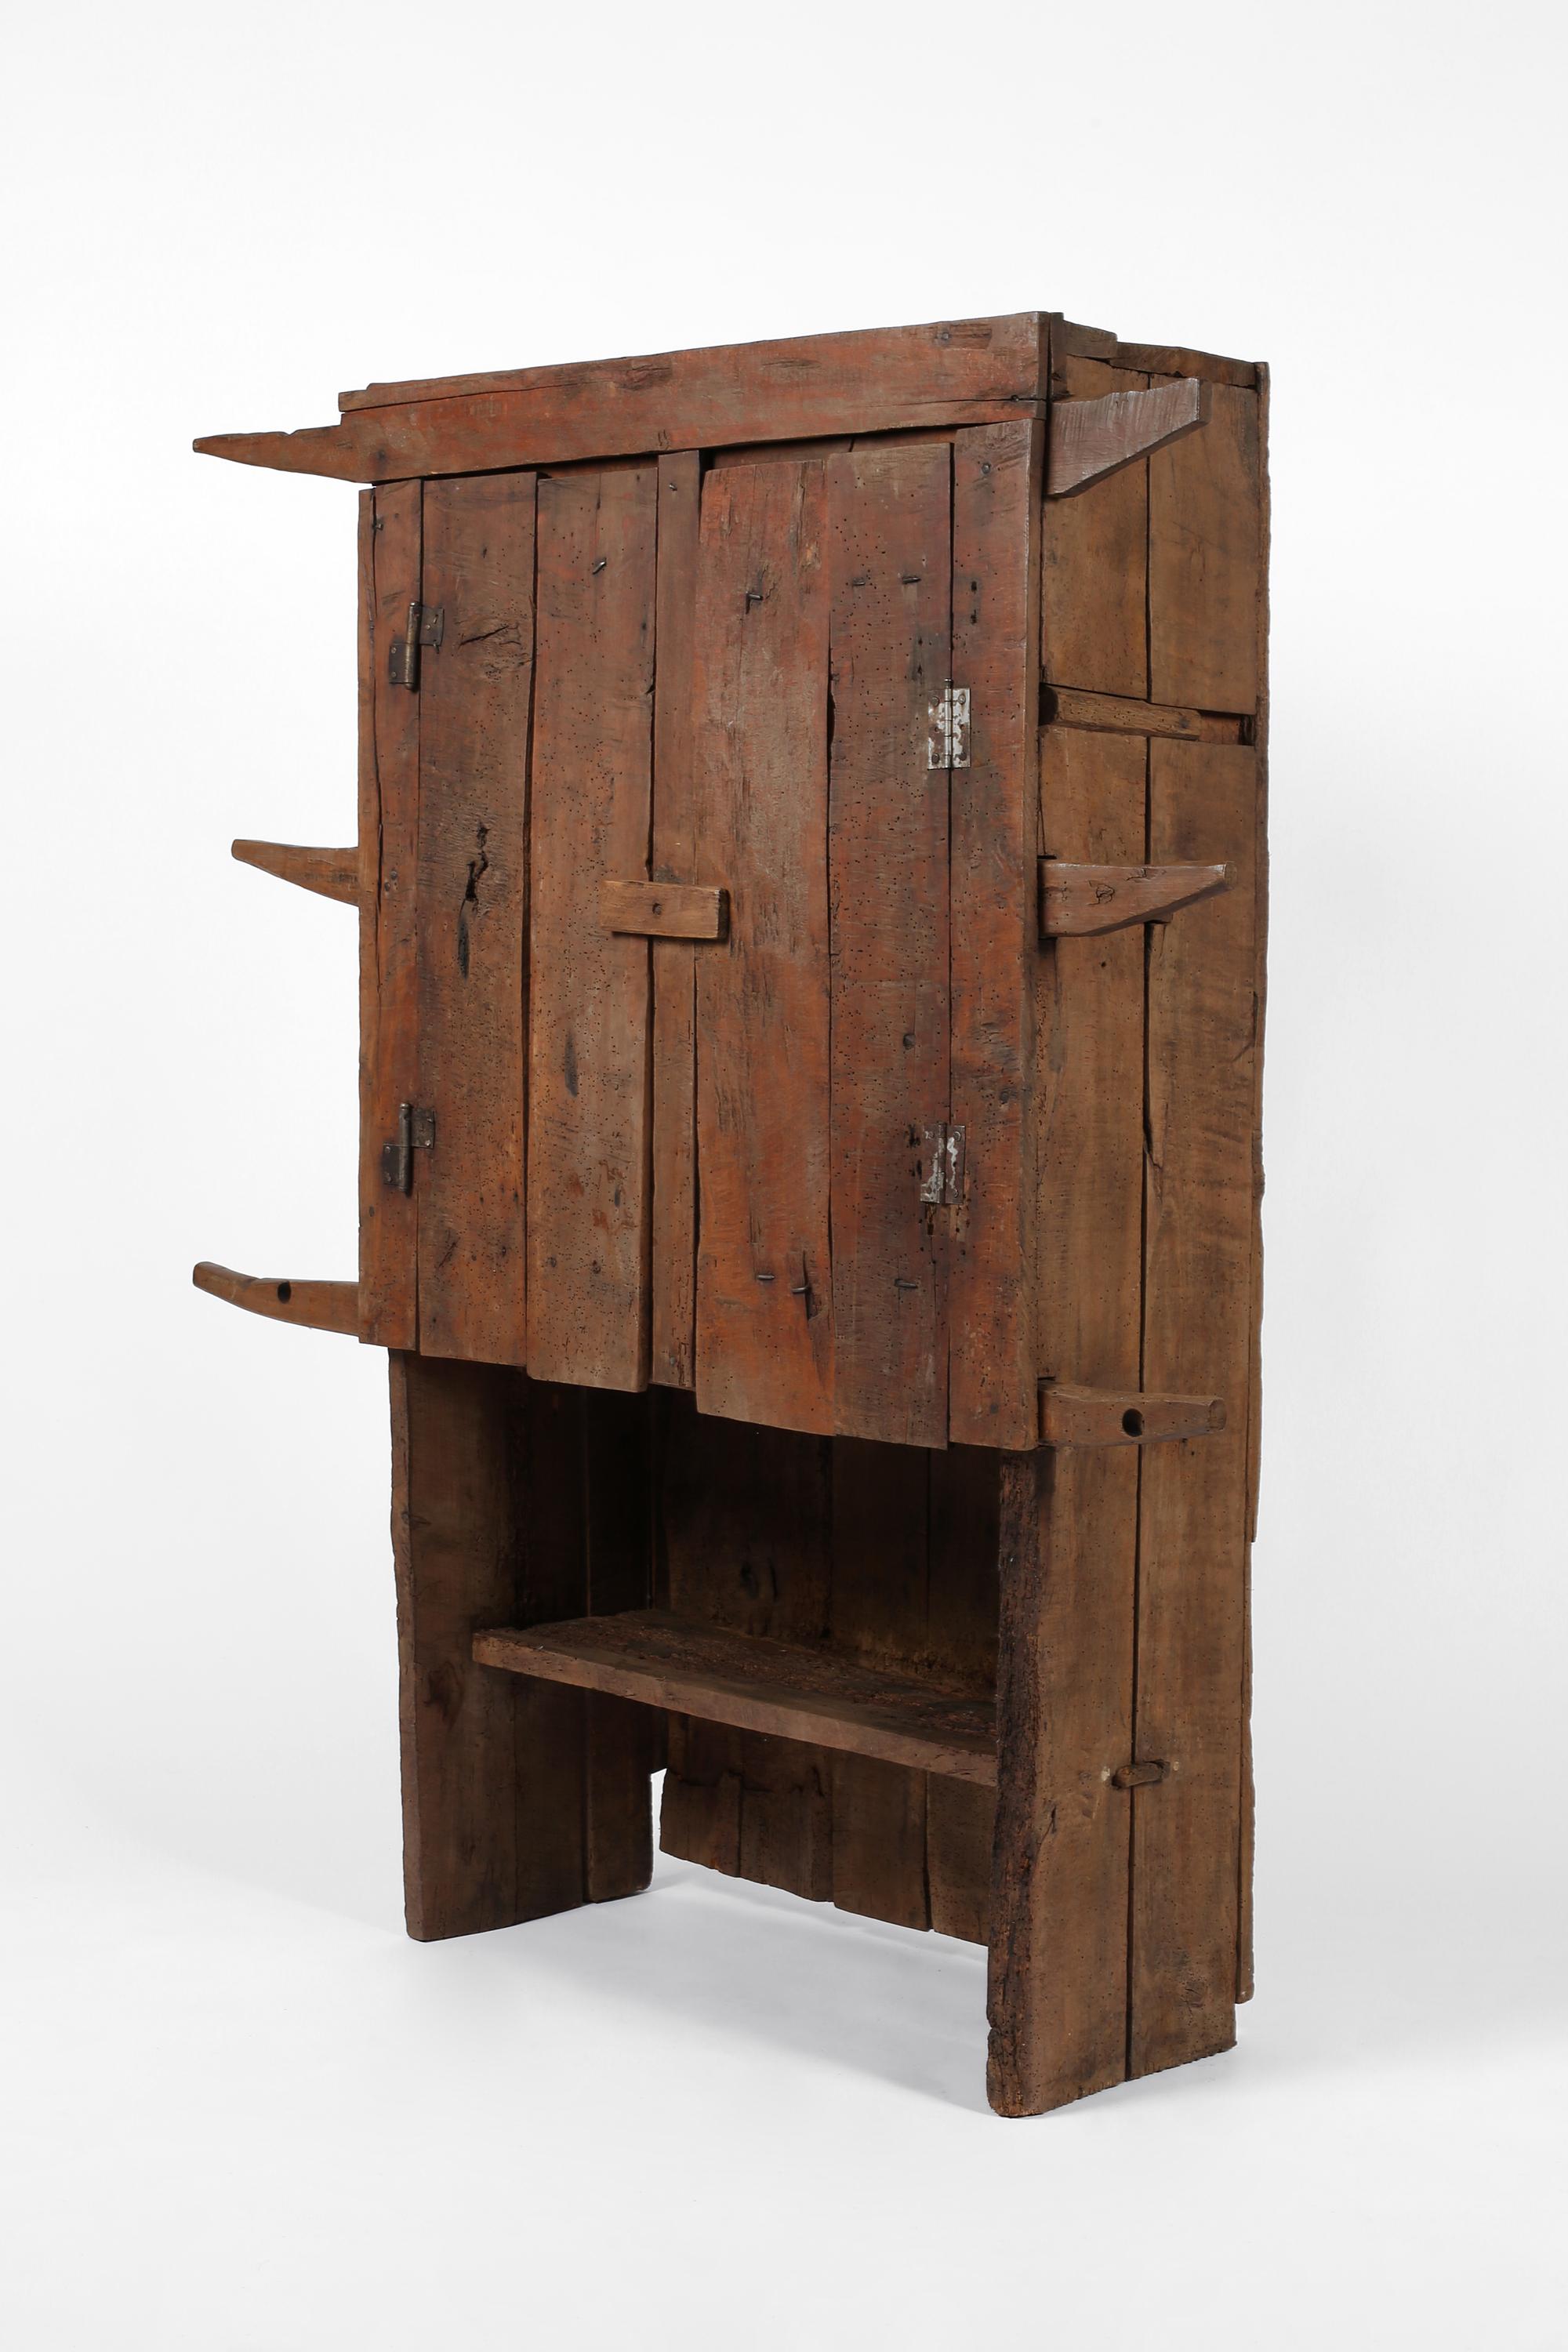 A statement 18th century cupboard from the Carpathian Mountain region. Primitively constructed from roughly hewn mixed hardwood timber, with two planked doors which open to reveal a single shelf within, plus single exterior shelf below. Central